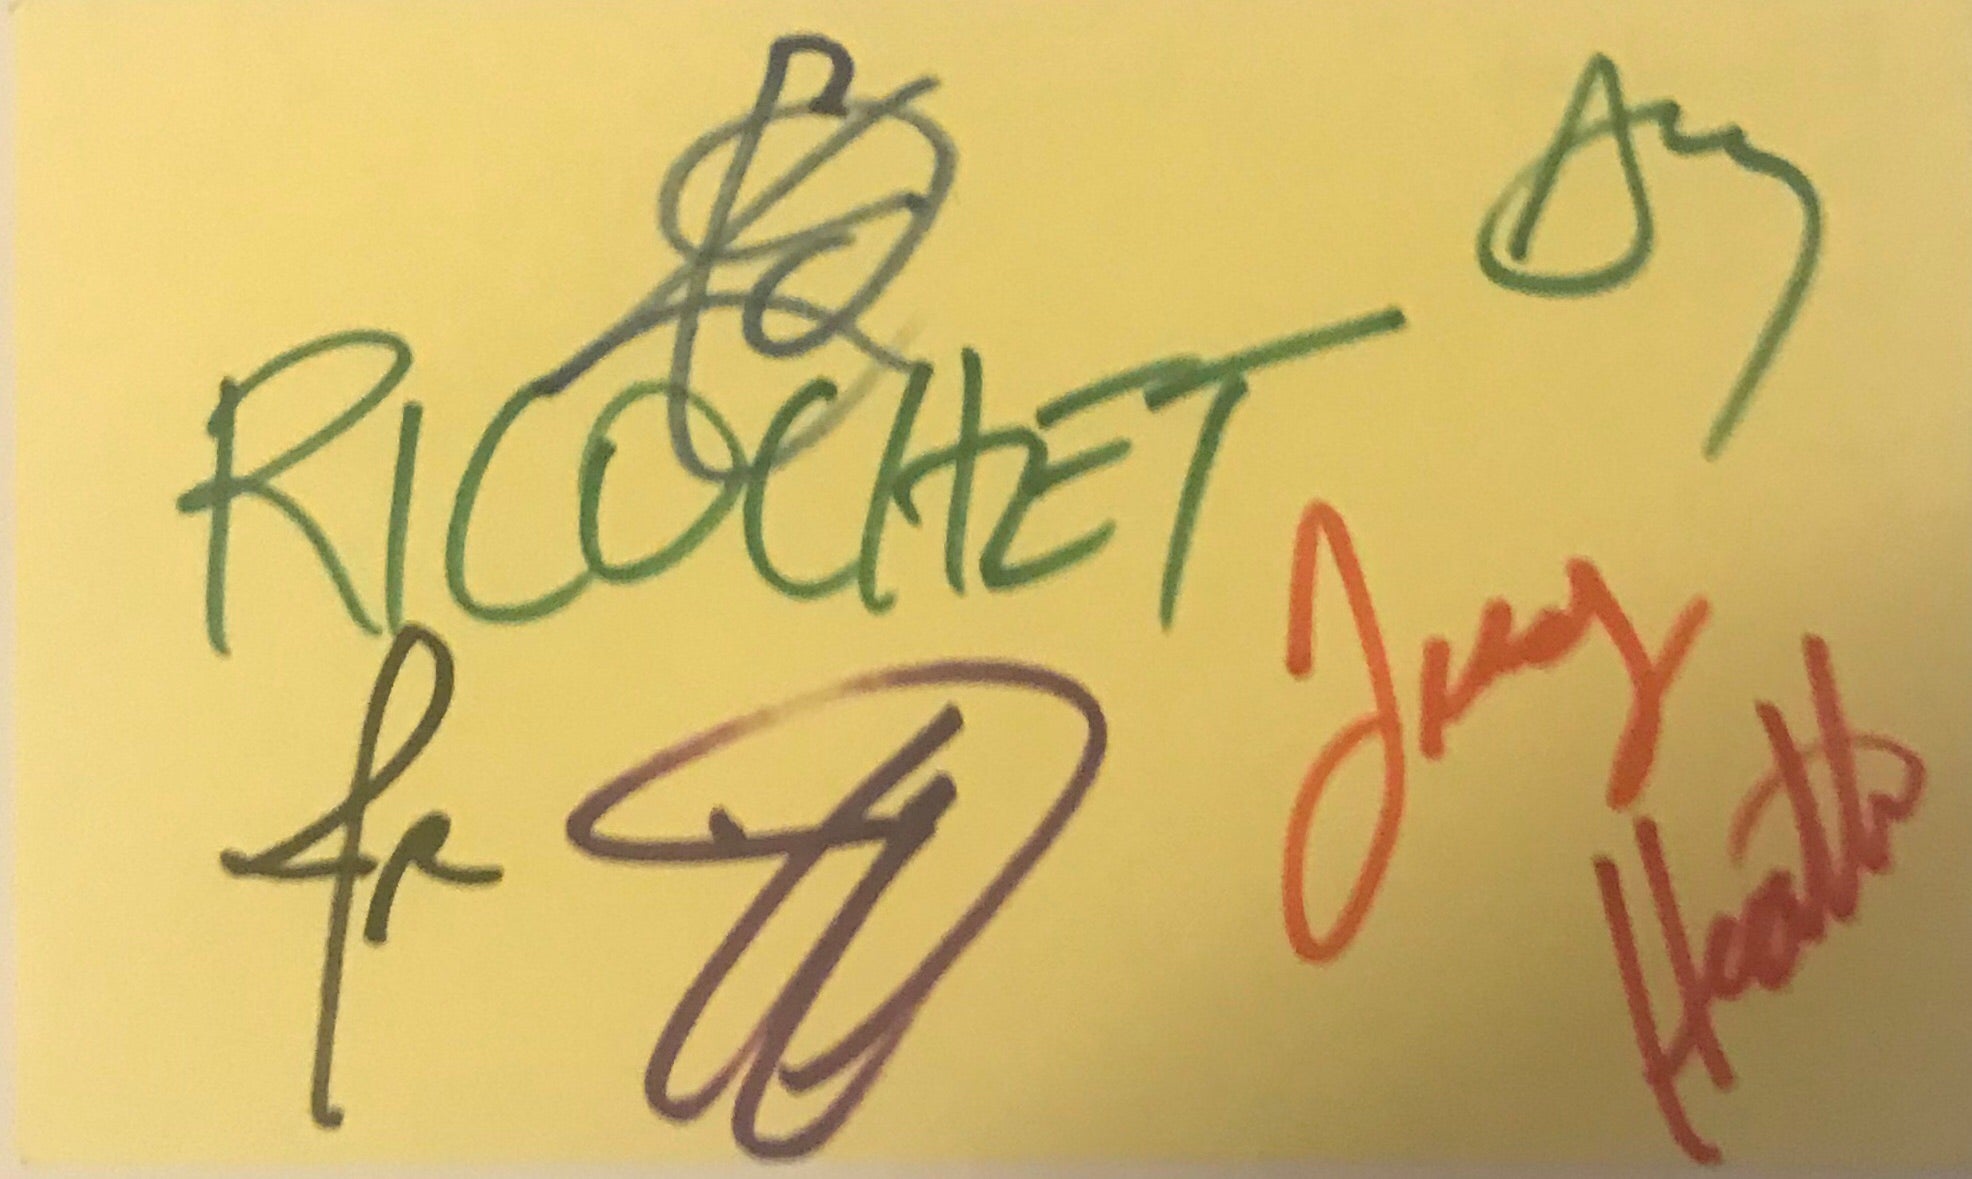 Ricochet - Country Music Band - Autographed Card